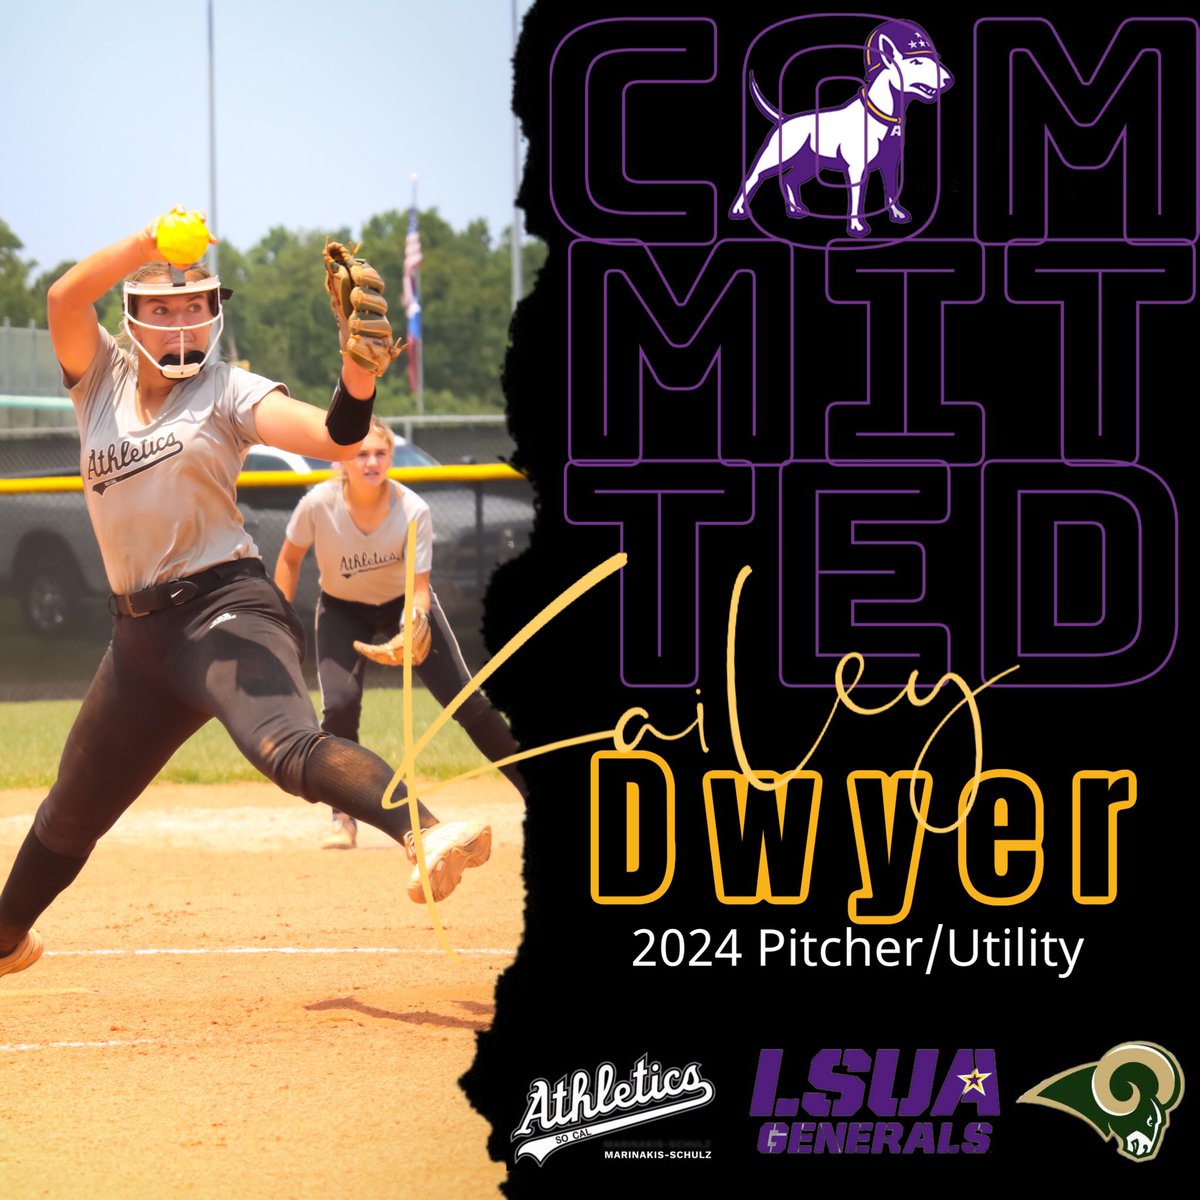 Congratulations to Kailey Dwyer 2024 pitcher/utility @kaileydwyer2024 on her commitment to @LSUA_SB We are so proud of you!